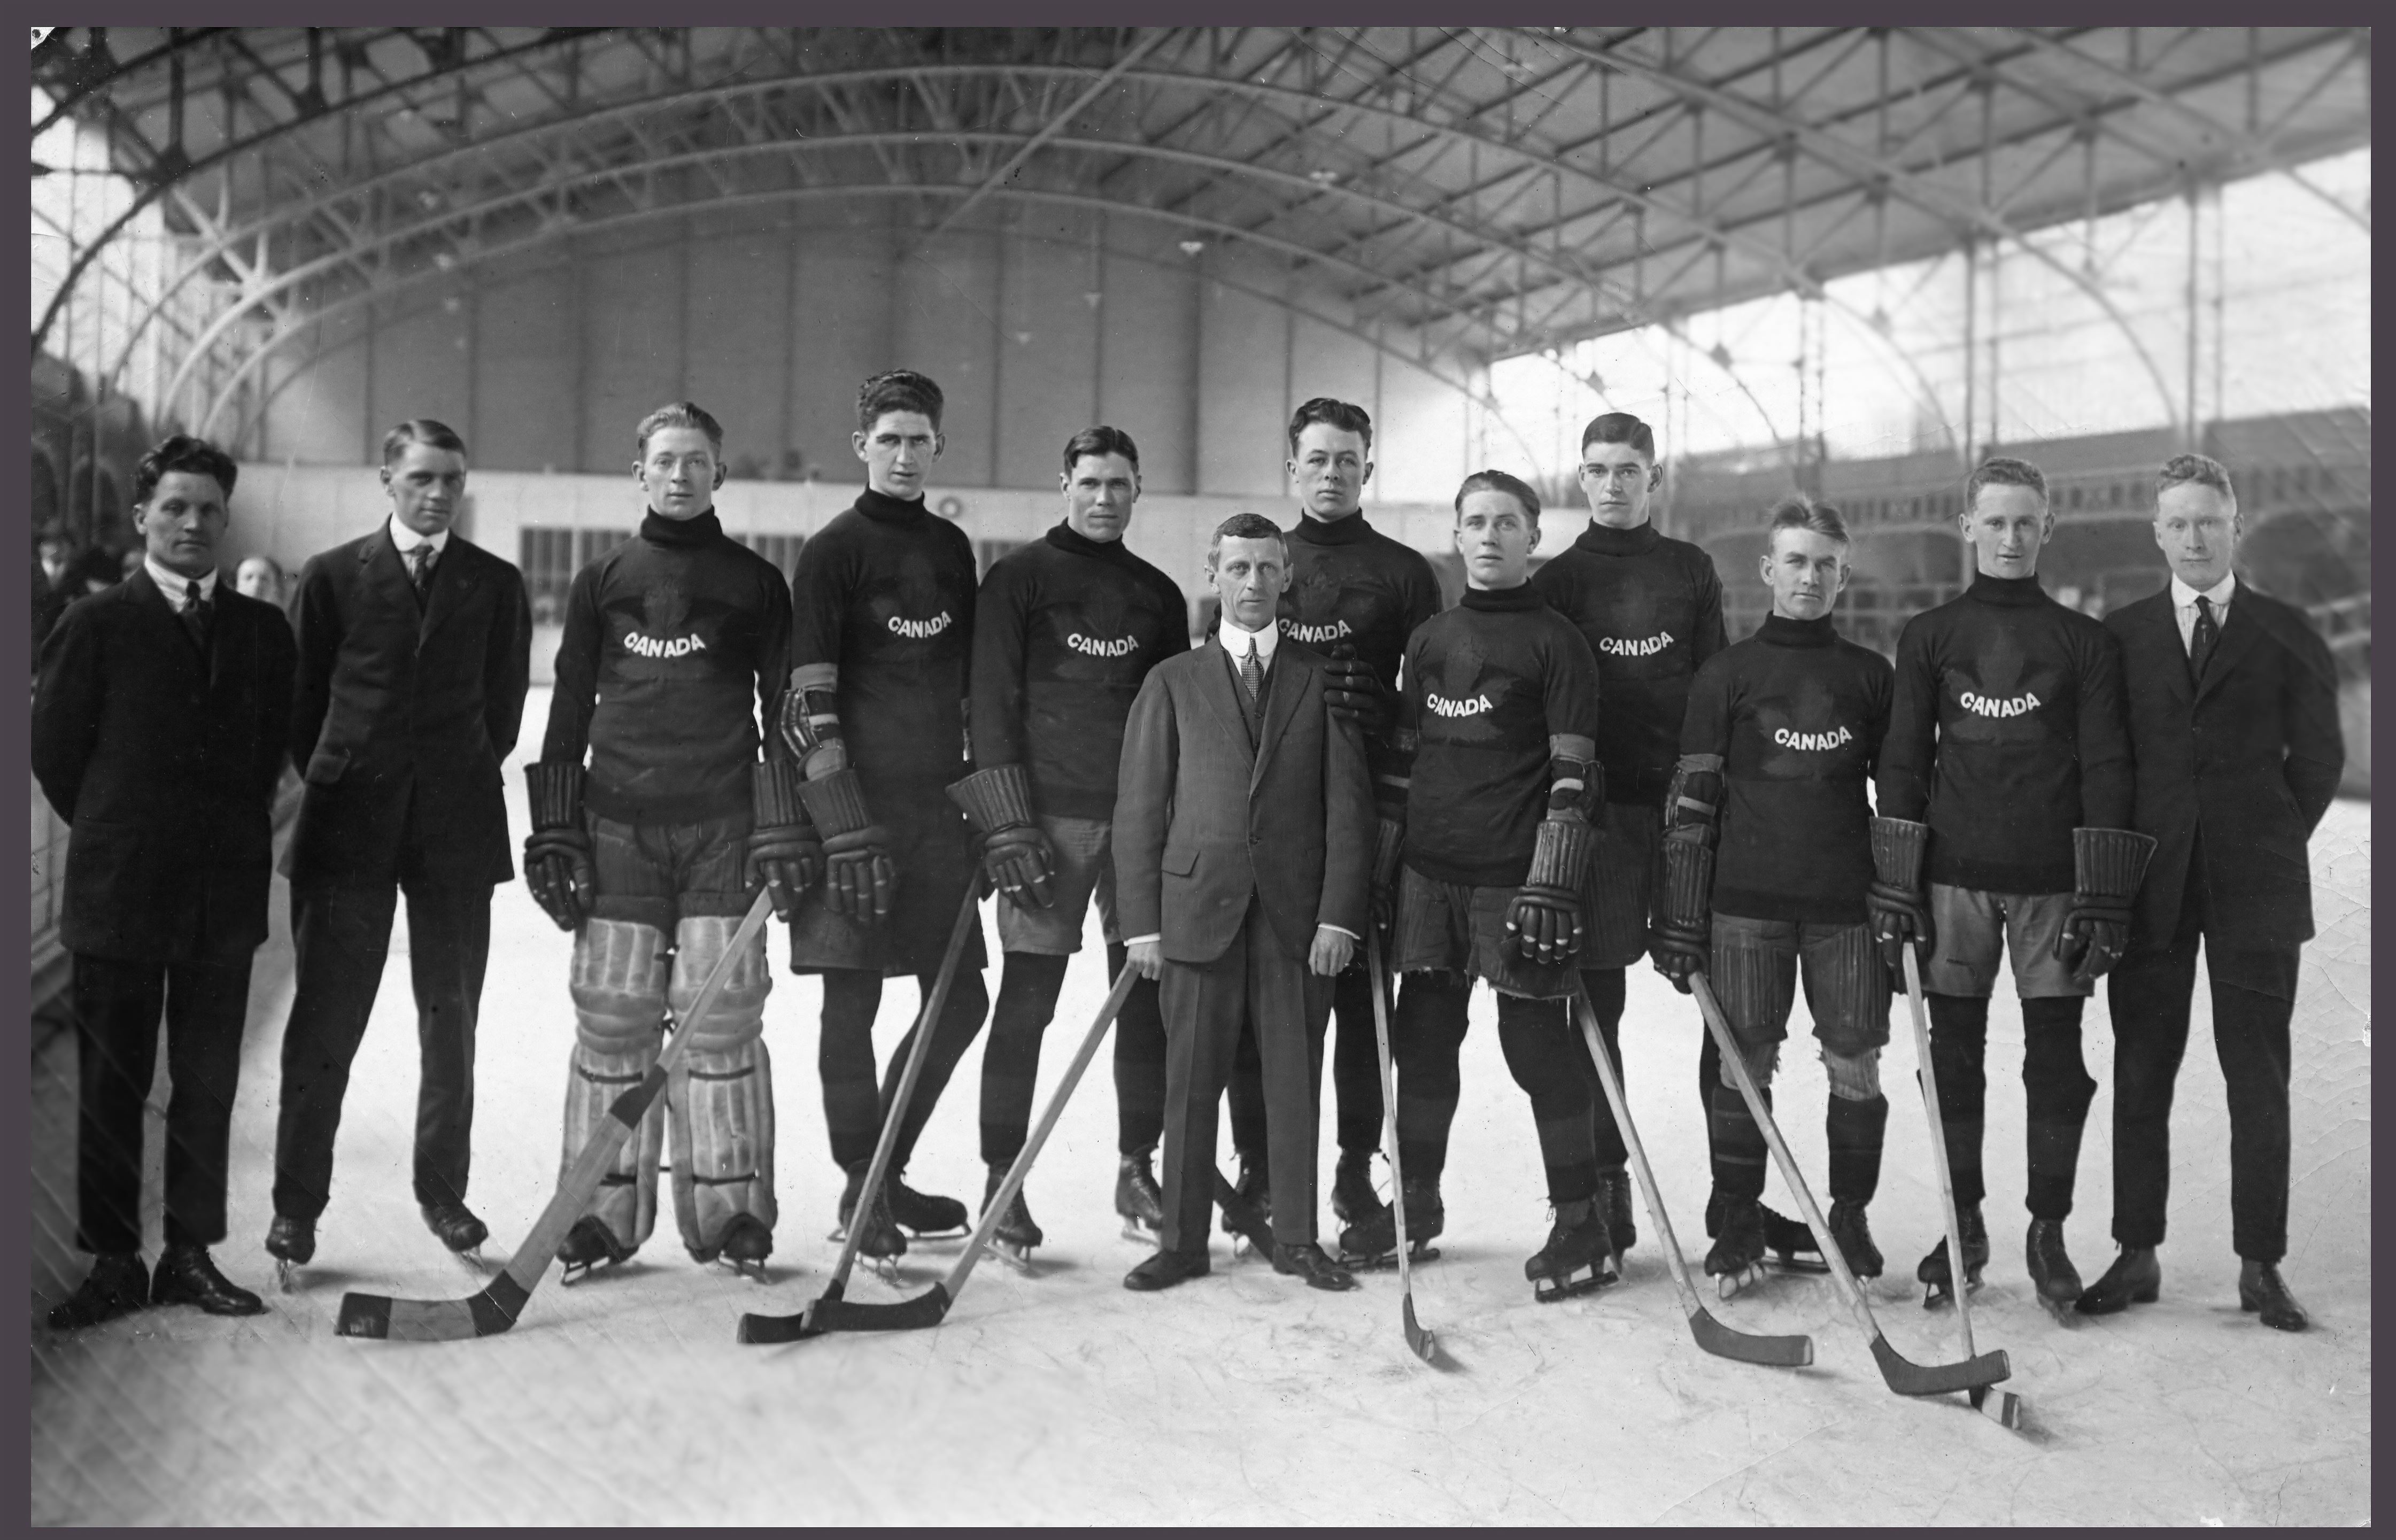 Members of the 1920 Canadian Olympic hockey team